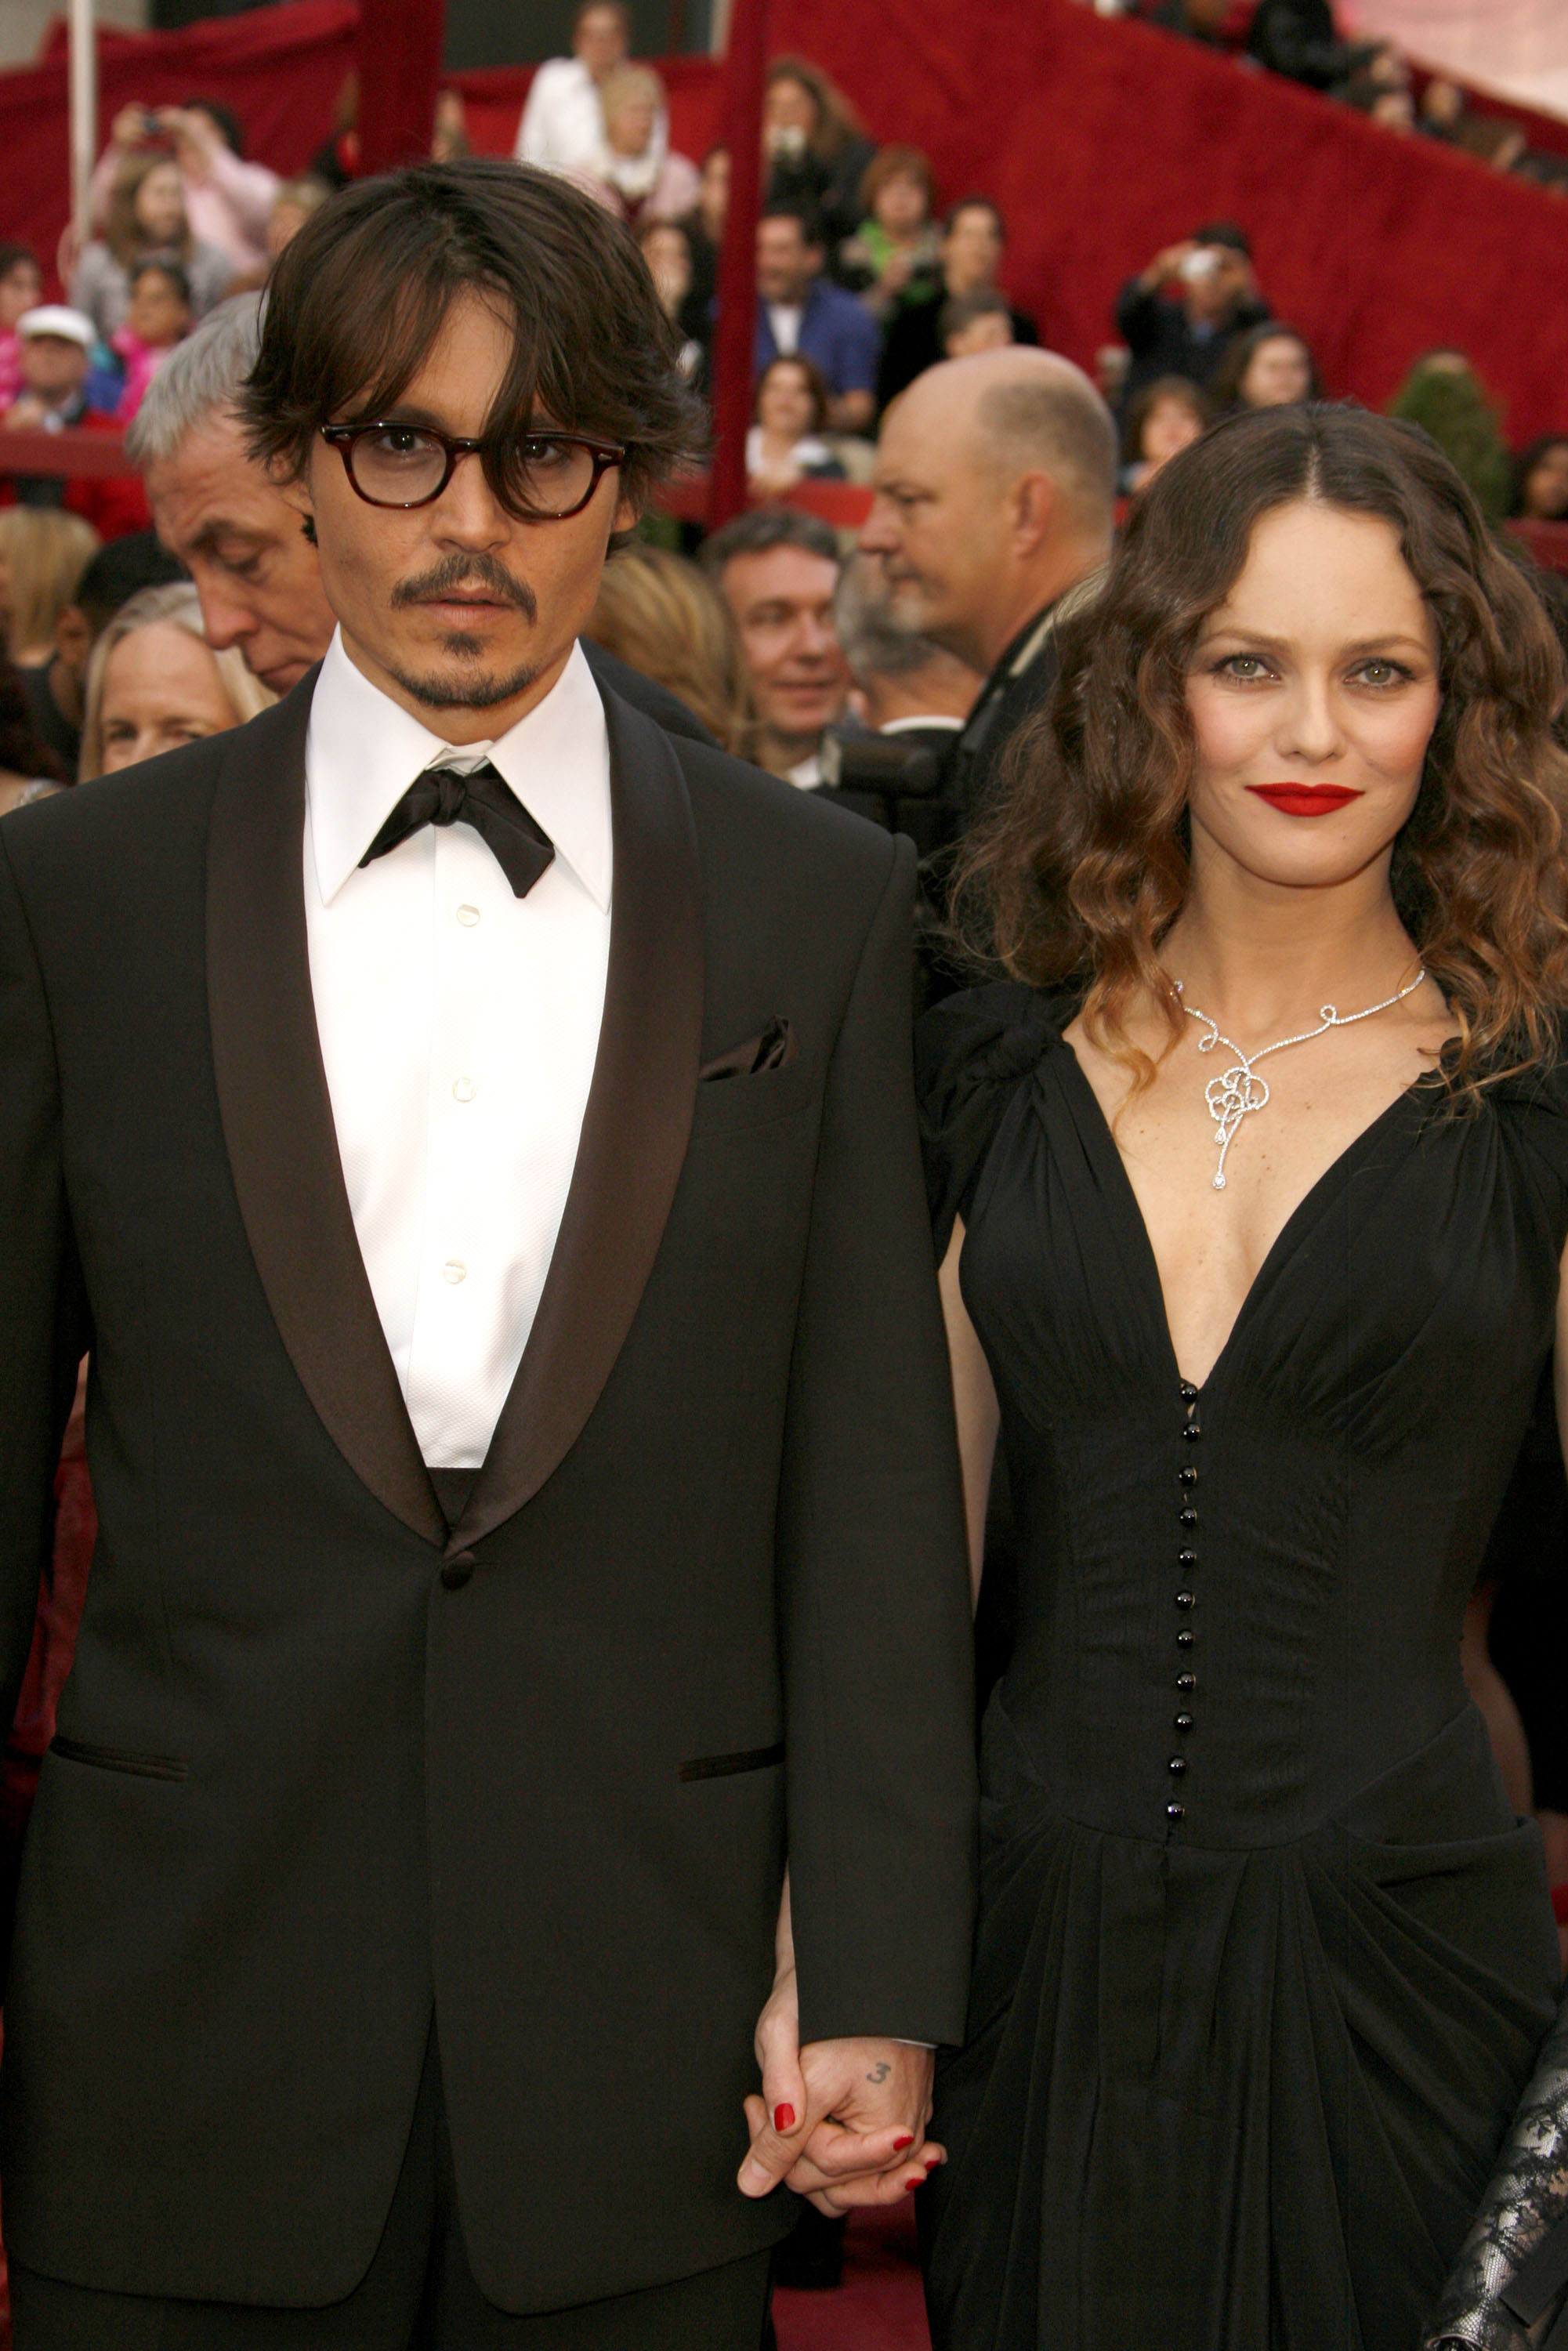 Actor Johnny Depp and singer Vanessa Paradis attends the 80th Annual Academy Awards at the Kodak Theatre on February 24, 2008 in Los Angeles, California.  